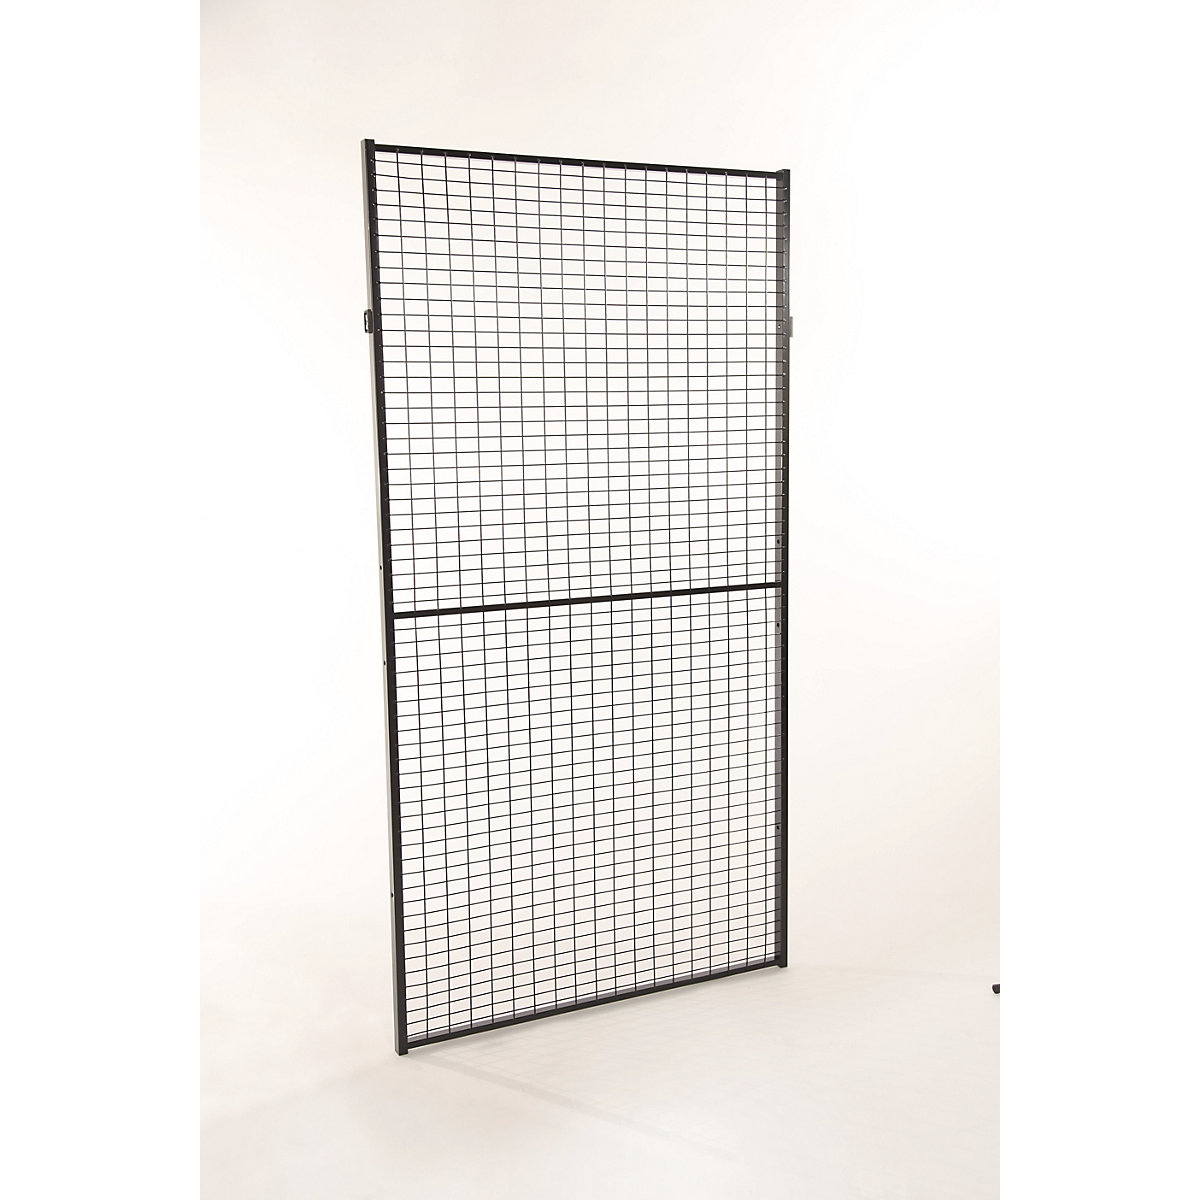 Axelent – X-GUARD CLASSIC machine protective fencing, wall section, height 1900 mm, width 500 mm